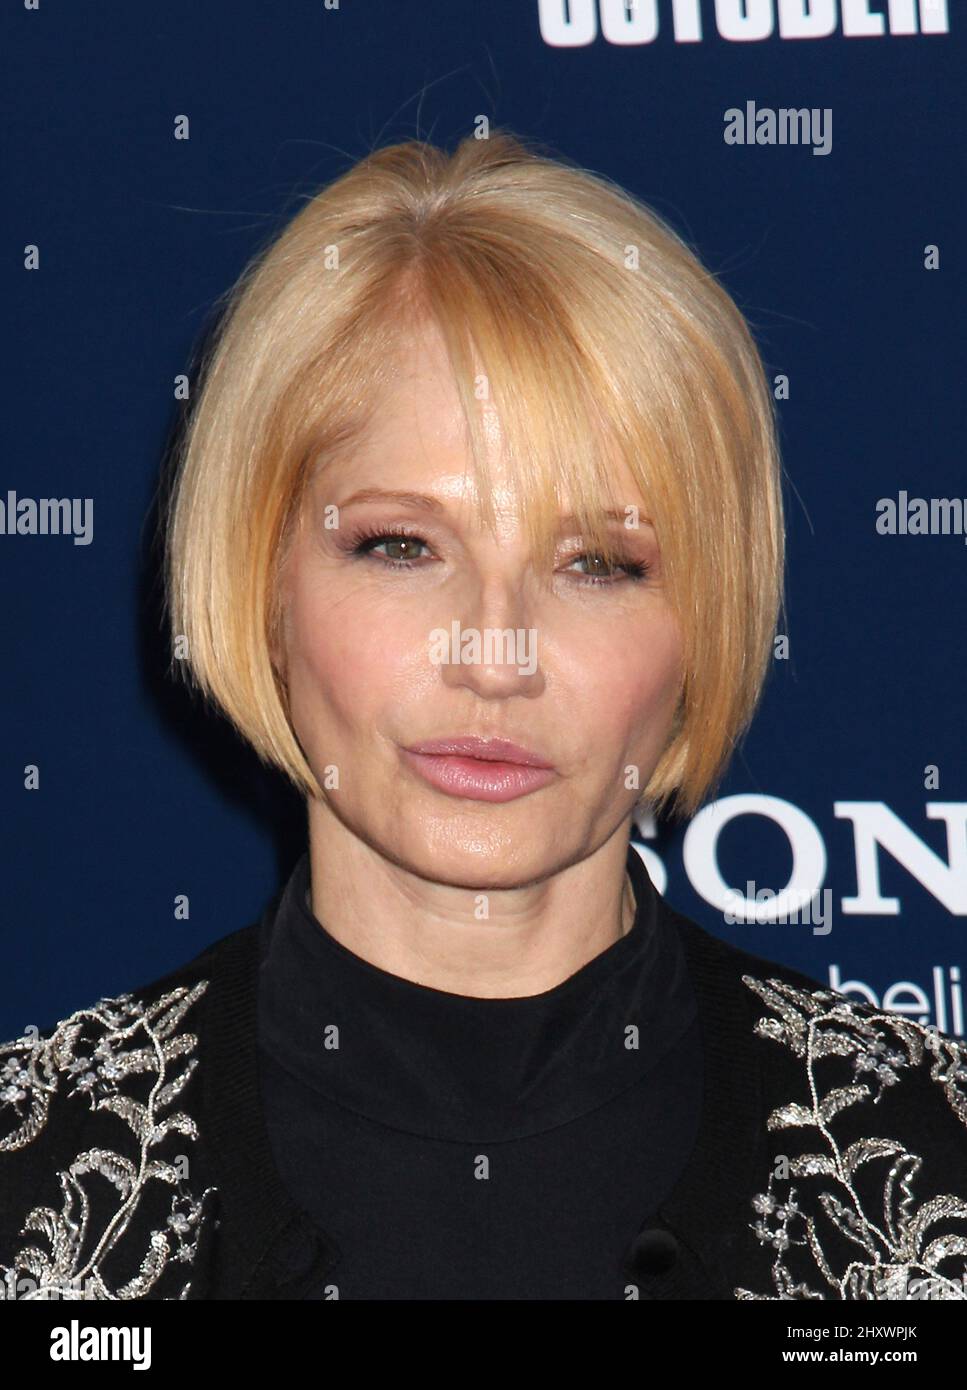 Ellen Barkin at the premiere for 'The Ides of March' at the Ziegfeld Theater in New York Stock Photo